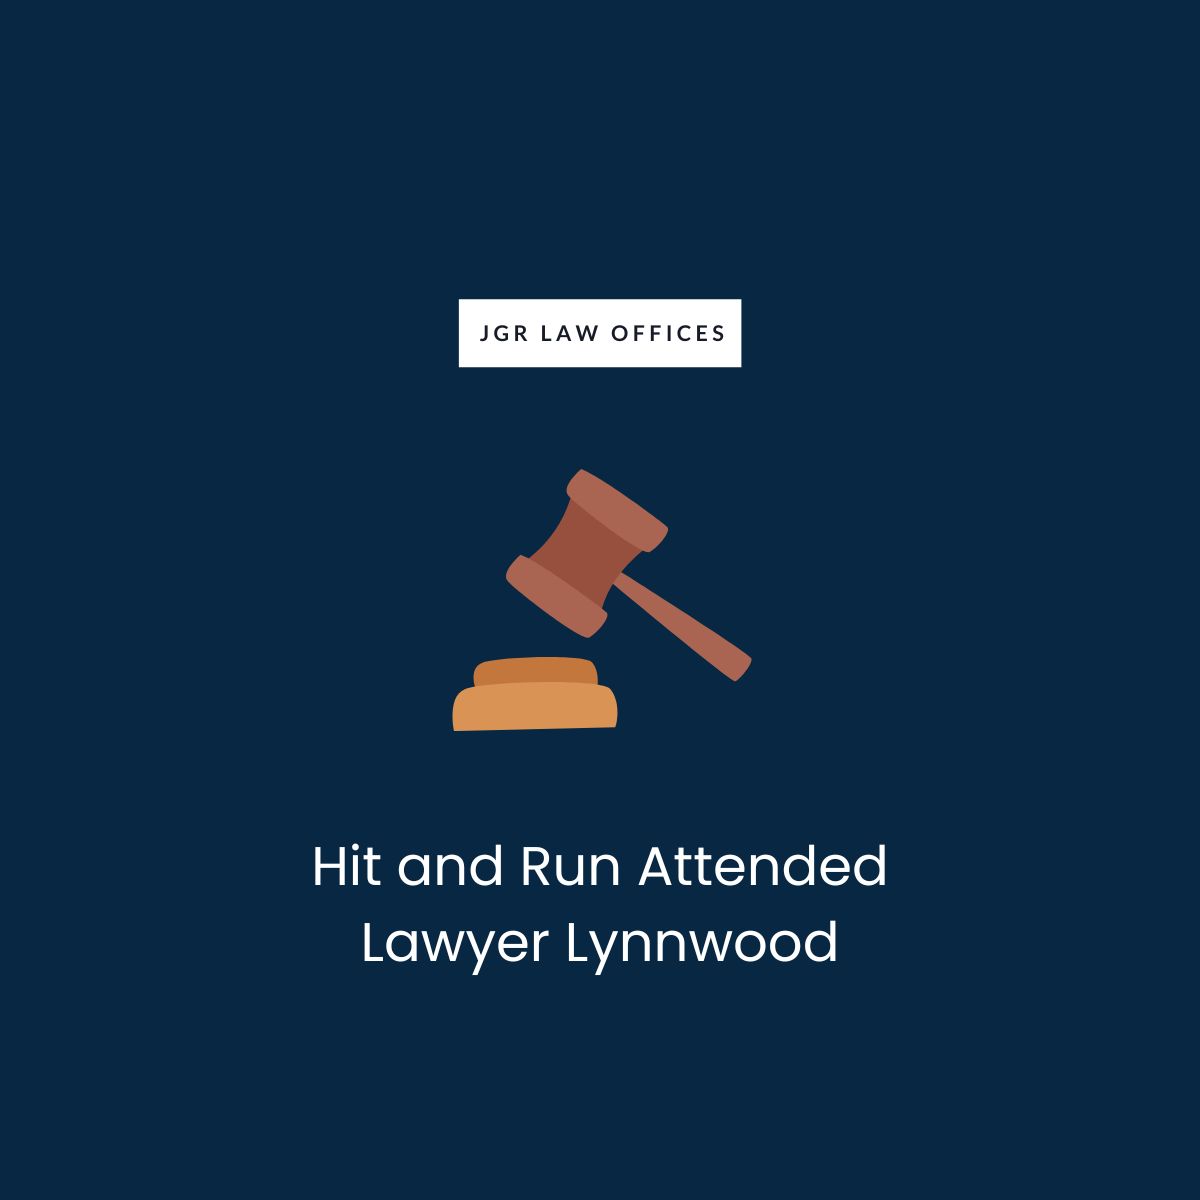 Hit and Run Attended Attorney Lynnwood